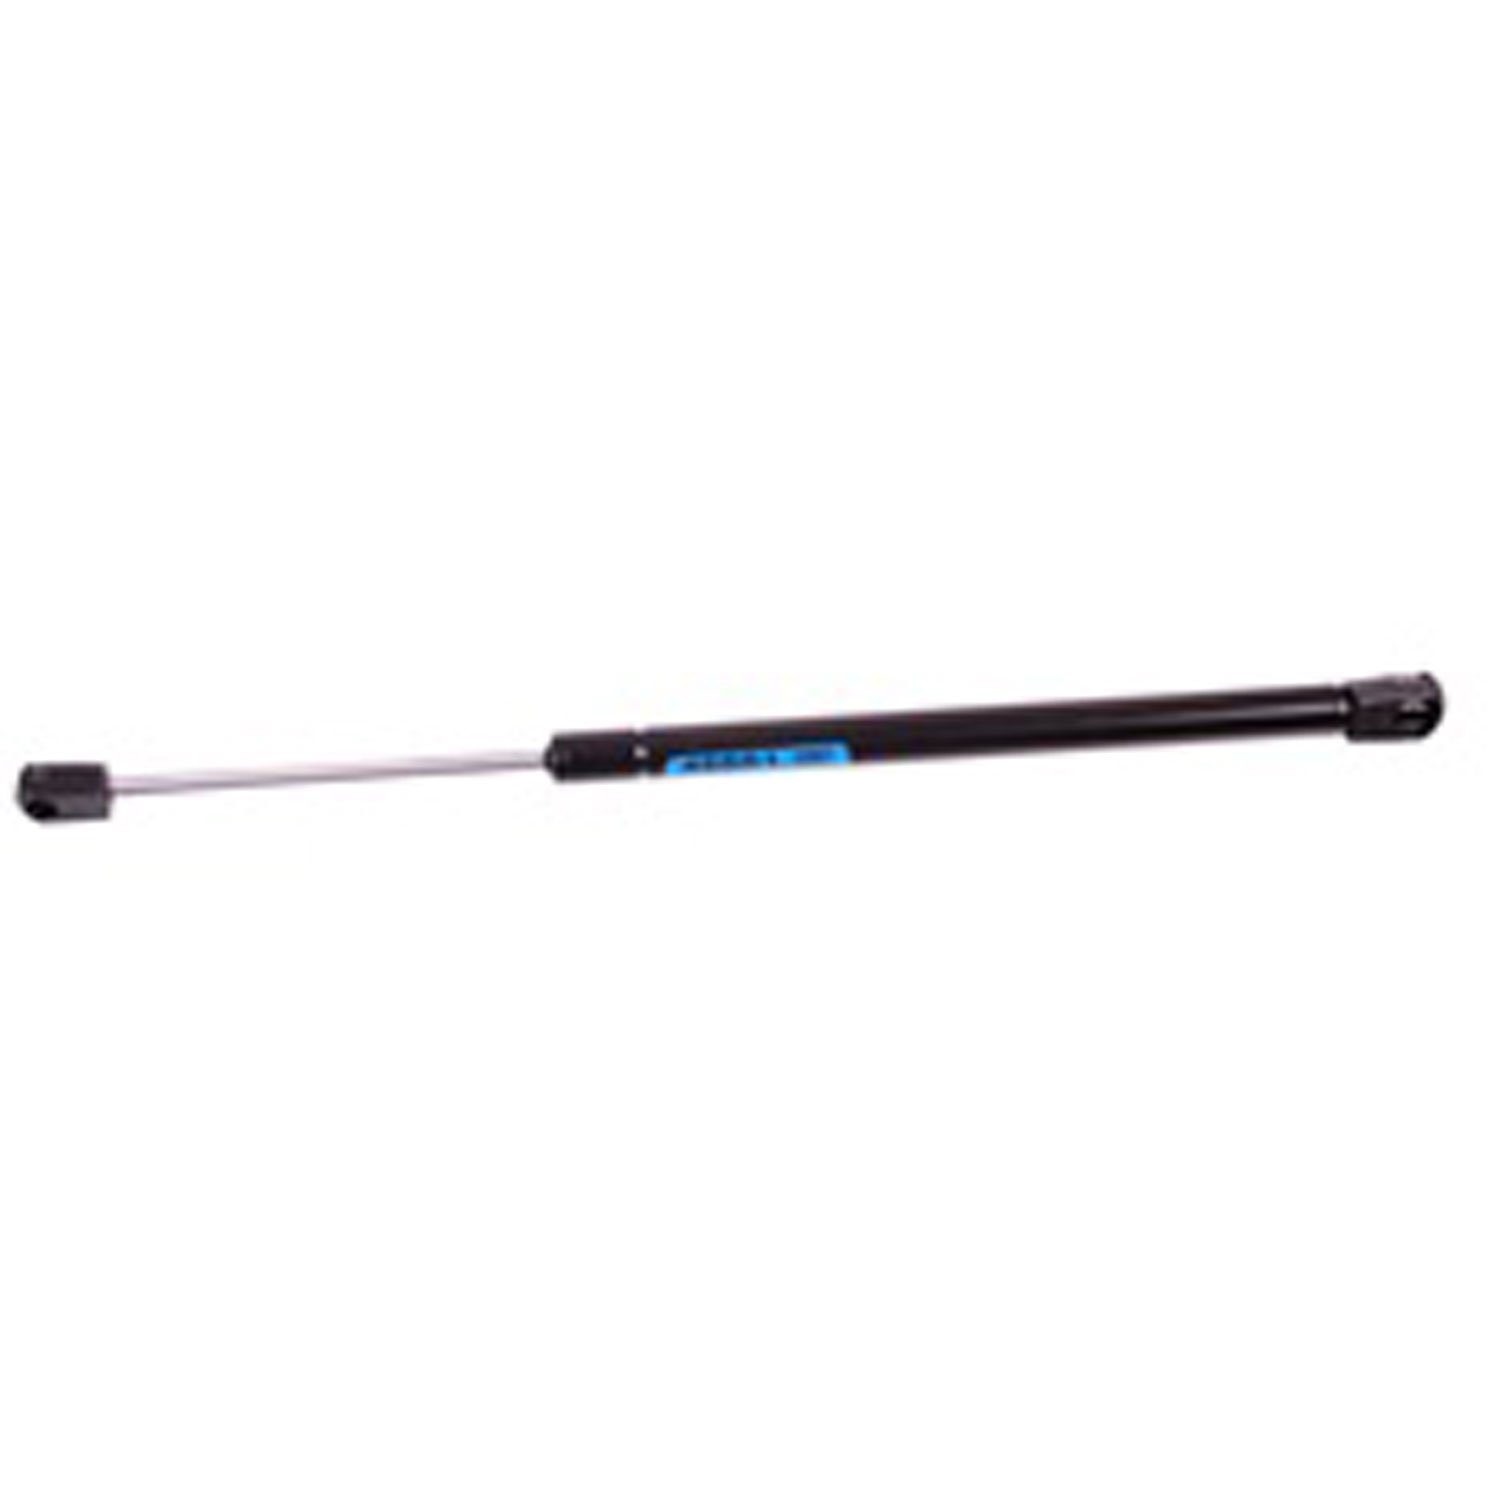 Replacement gas strut from Omix-ADA, Fits liftgate glass rear window on 05-06 Jeep Grand Cherokee WK